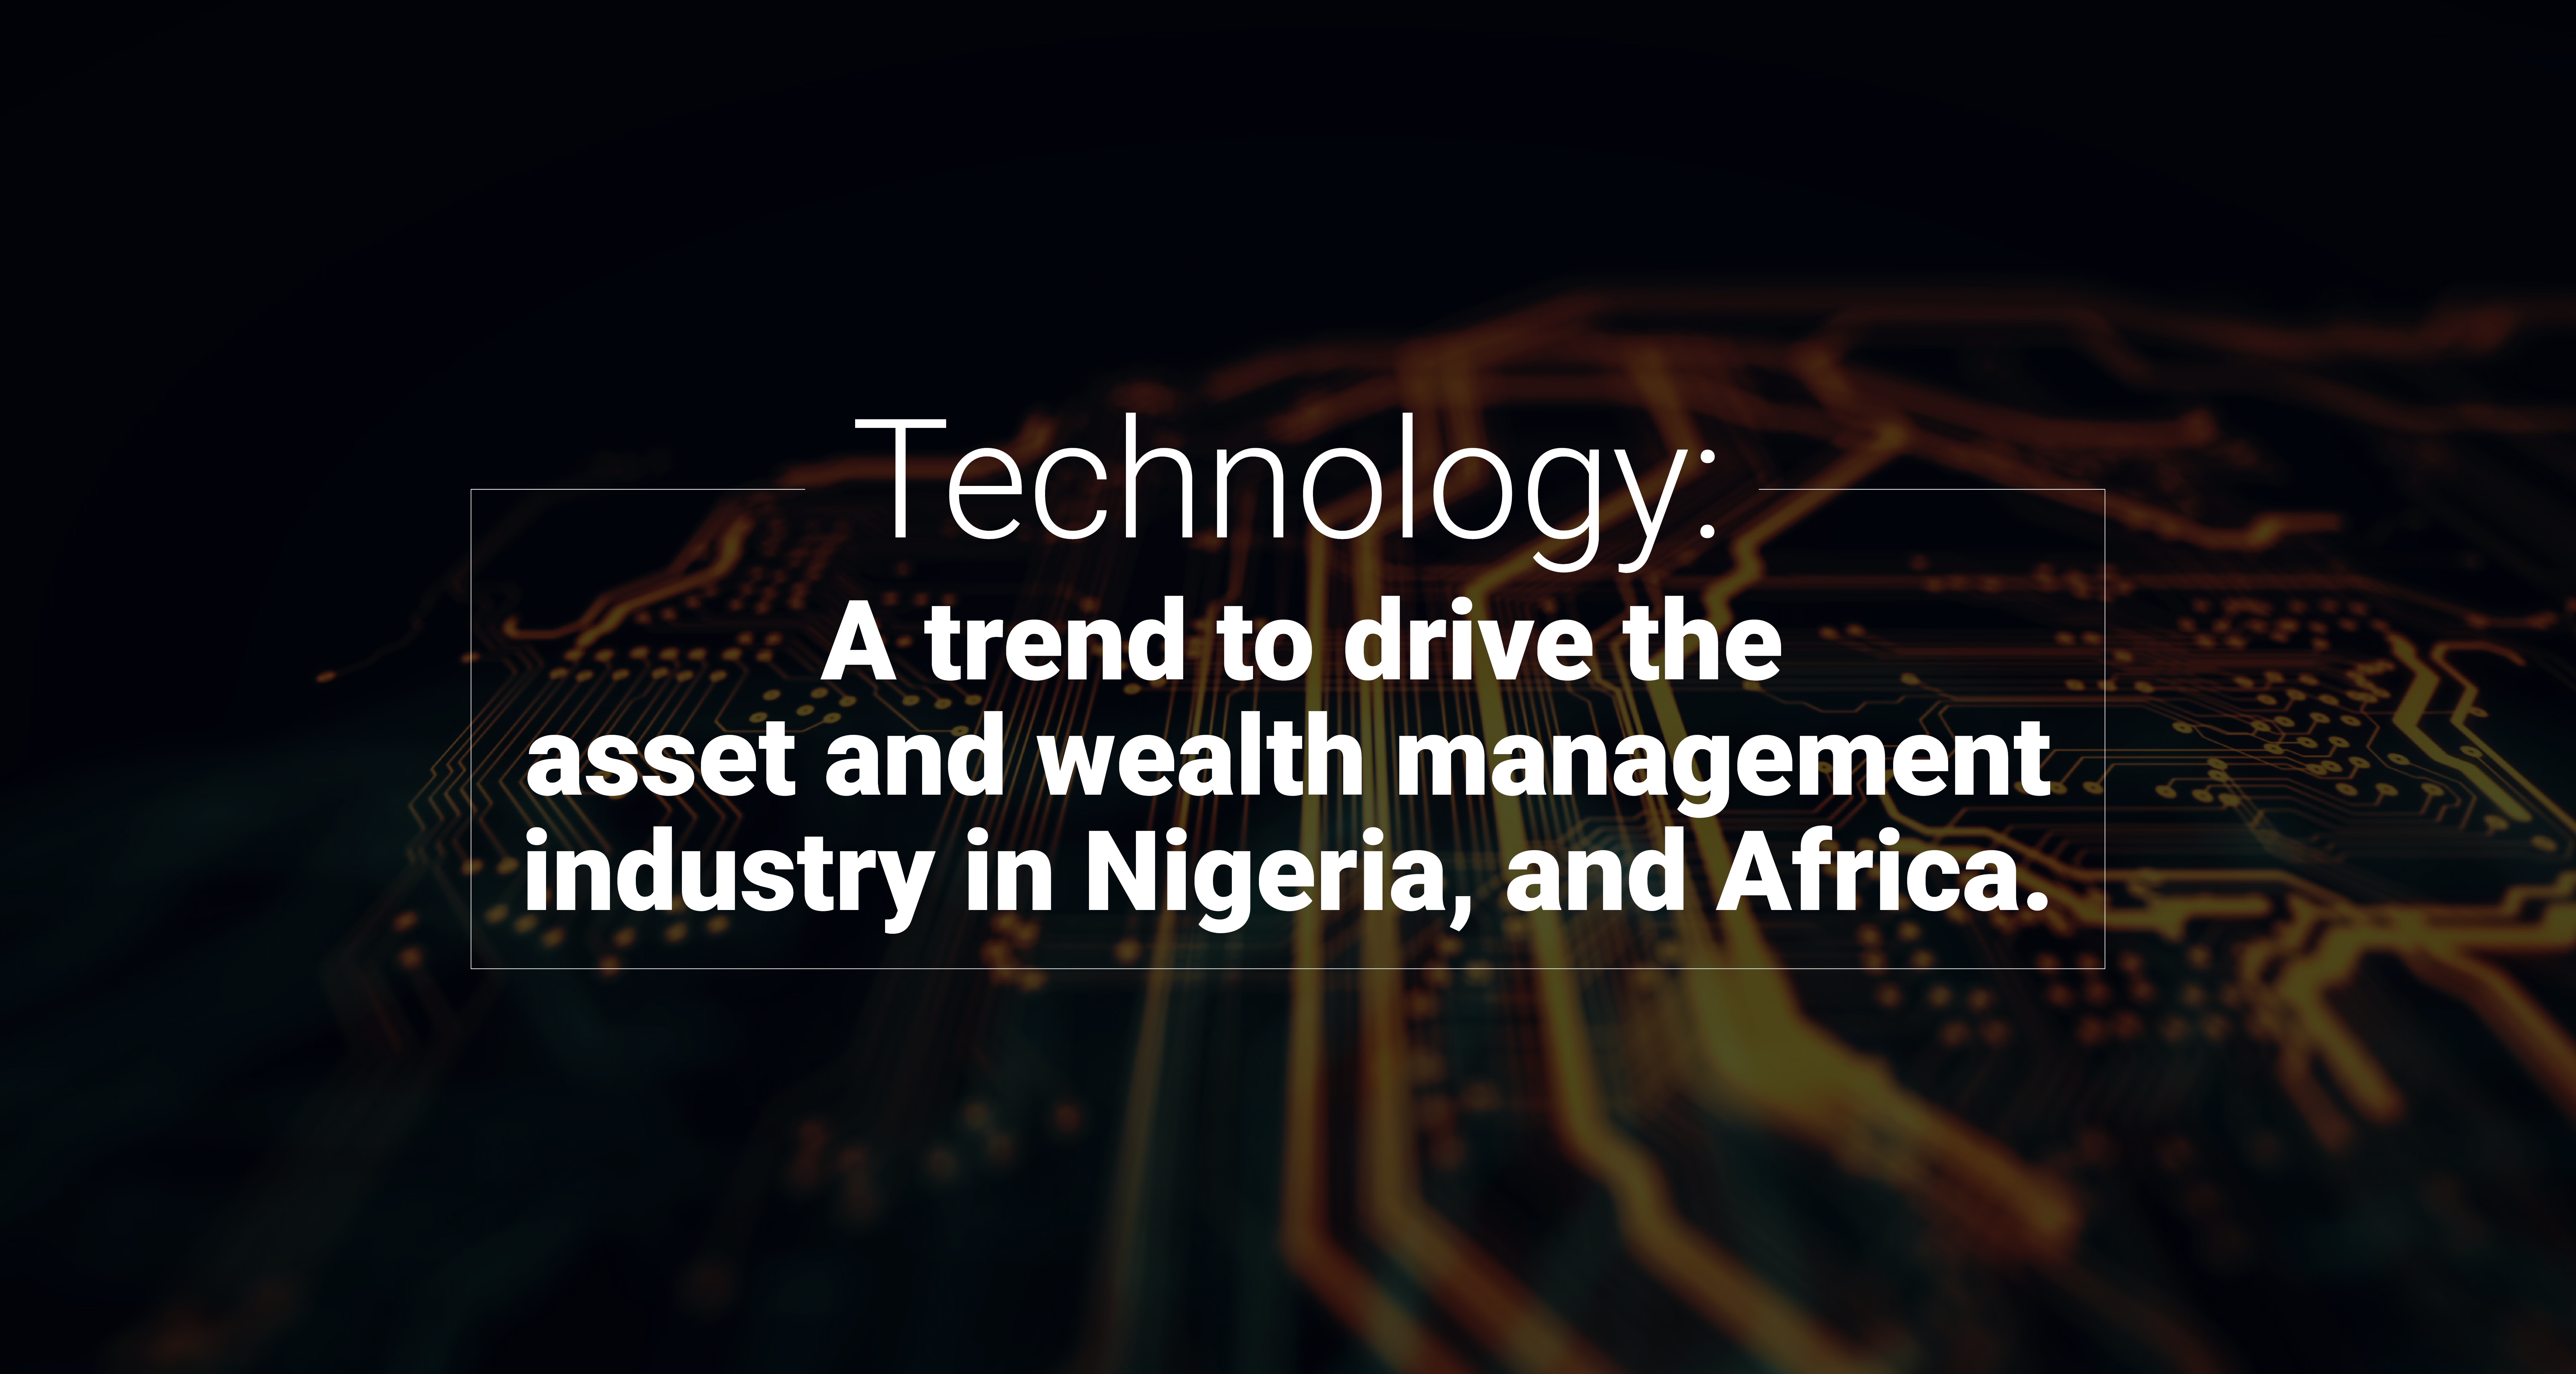 Technology: A trend to drive the asset and wealth management industry in Nigeria, and Africa Image